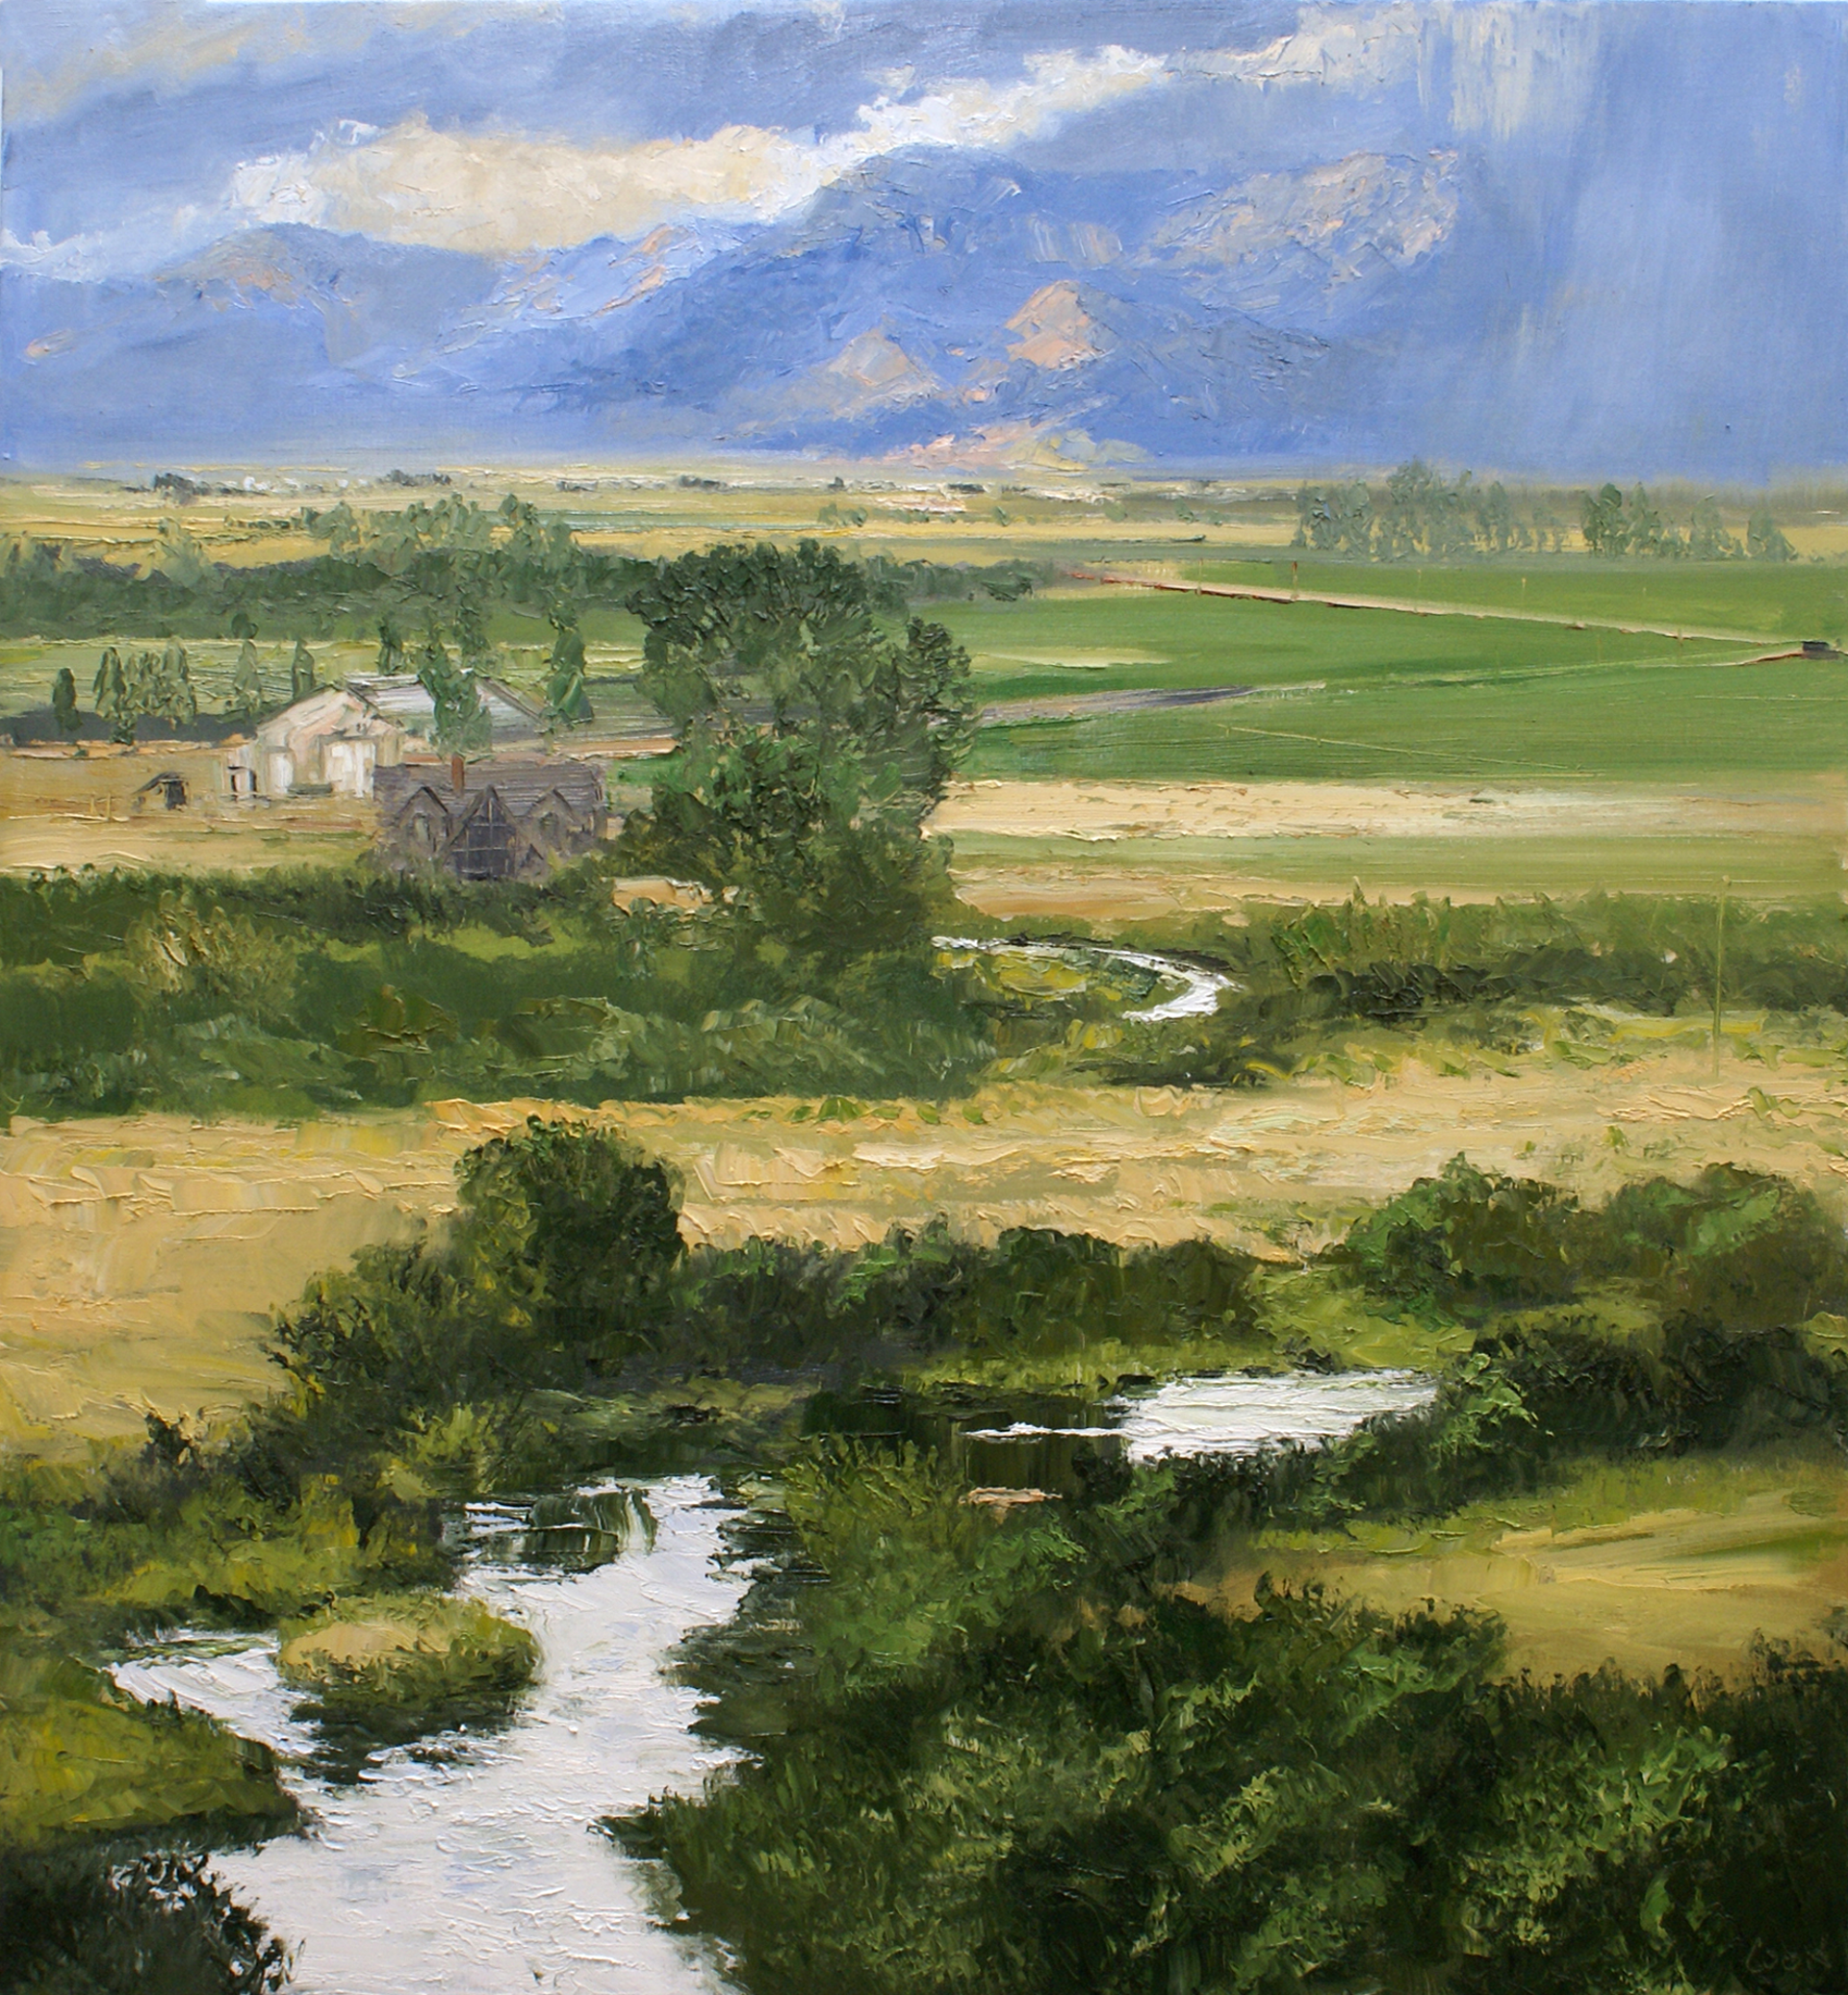 Afternoon Rain Showers - Silver Creek by James Cook